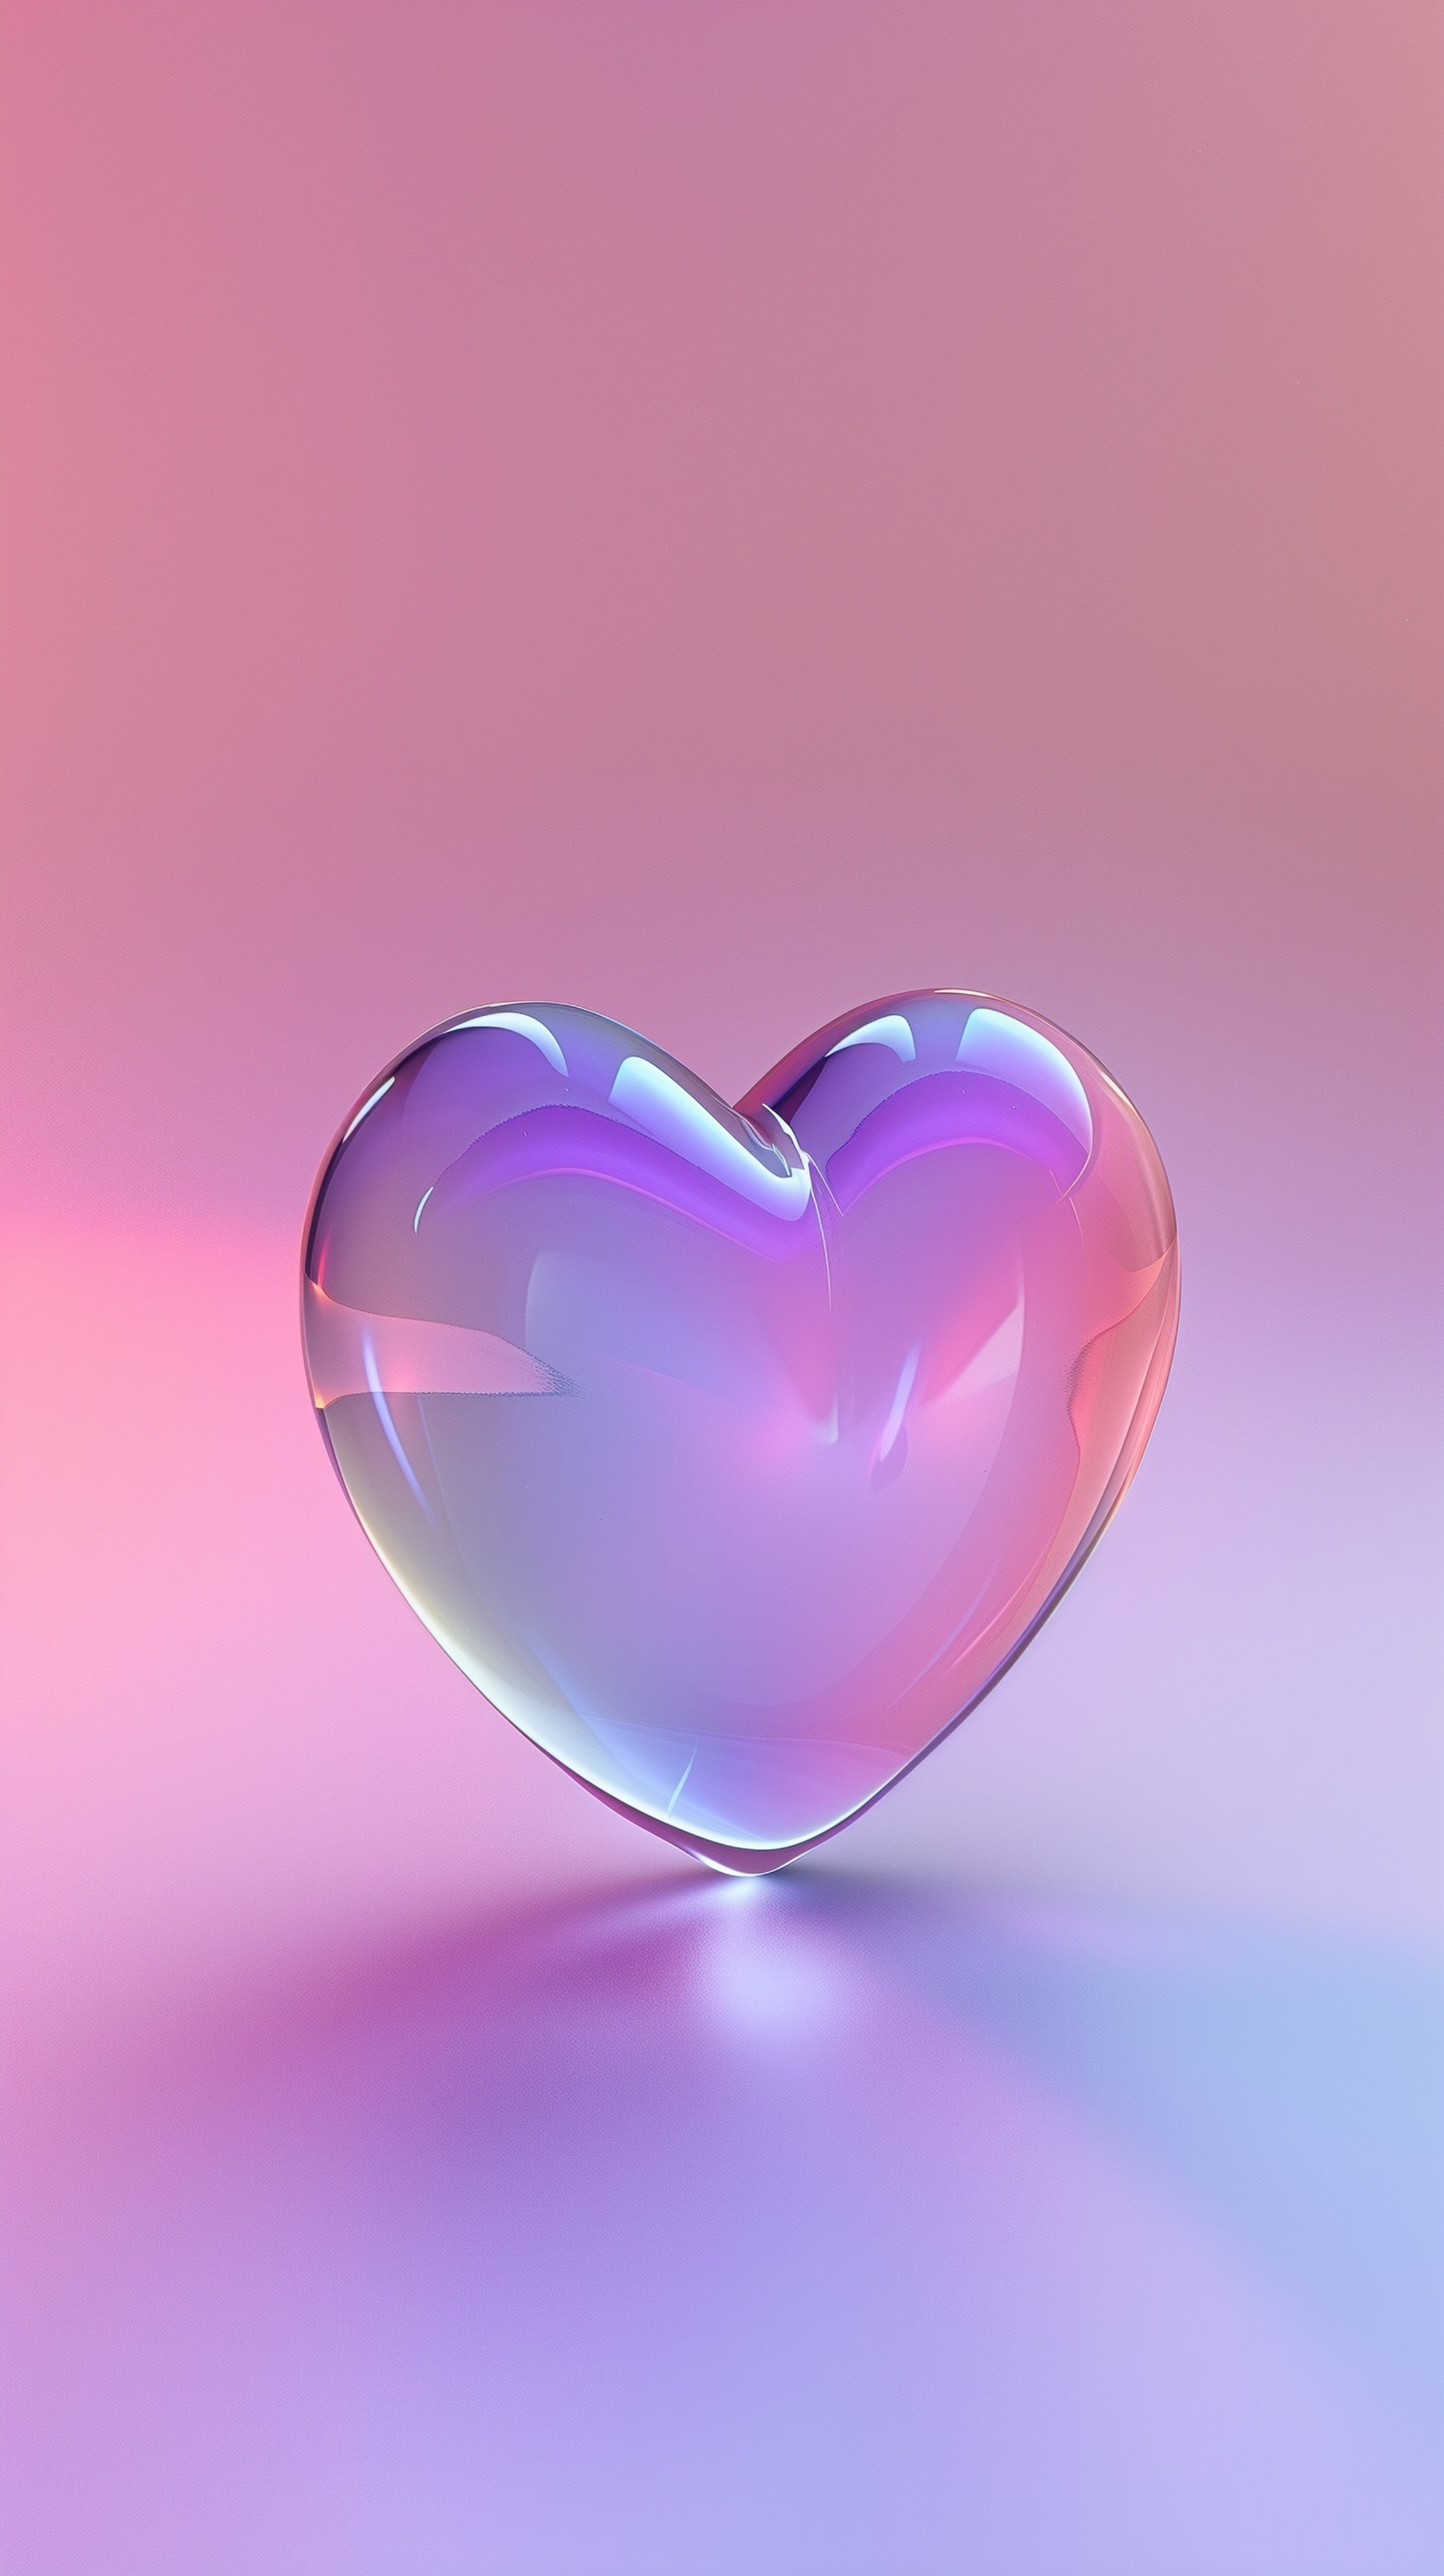 Colorful Glass Heart on Pink Background Papel de parede[47d8940110524ca1b371]